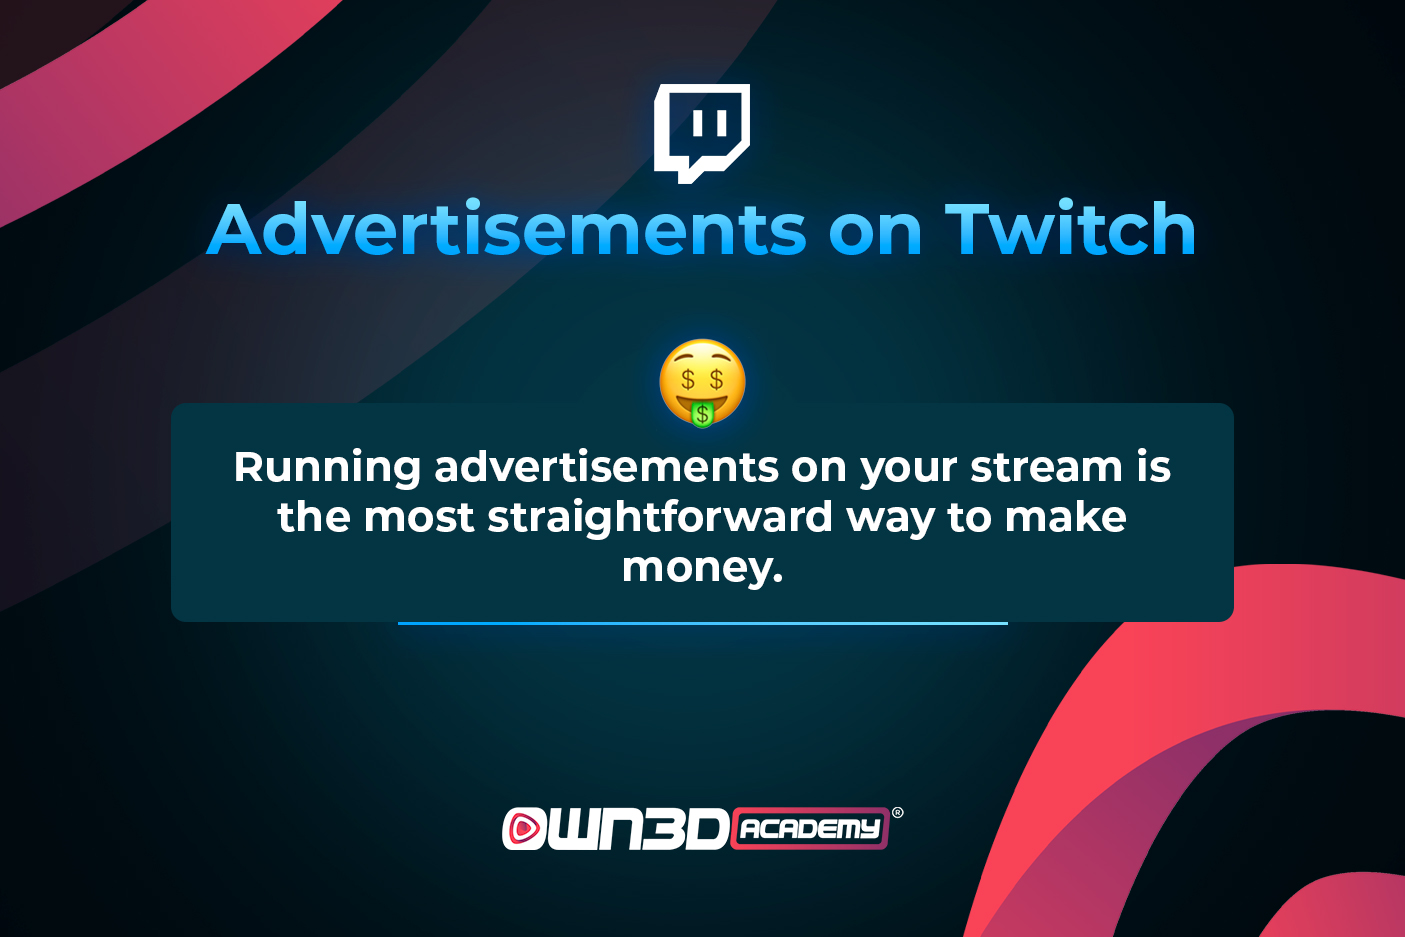 ENG_L3_MonetizationTwitch_AdsOnTwitch.jpg